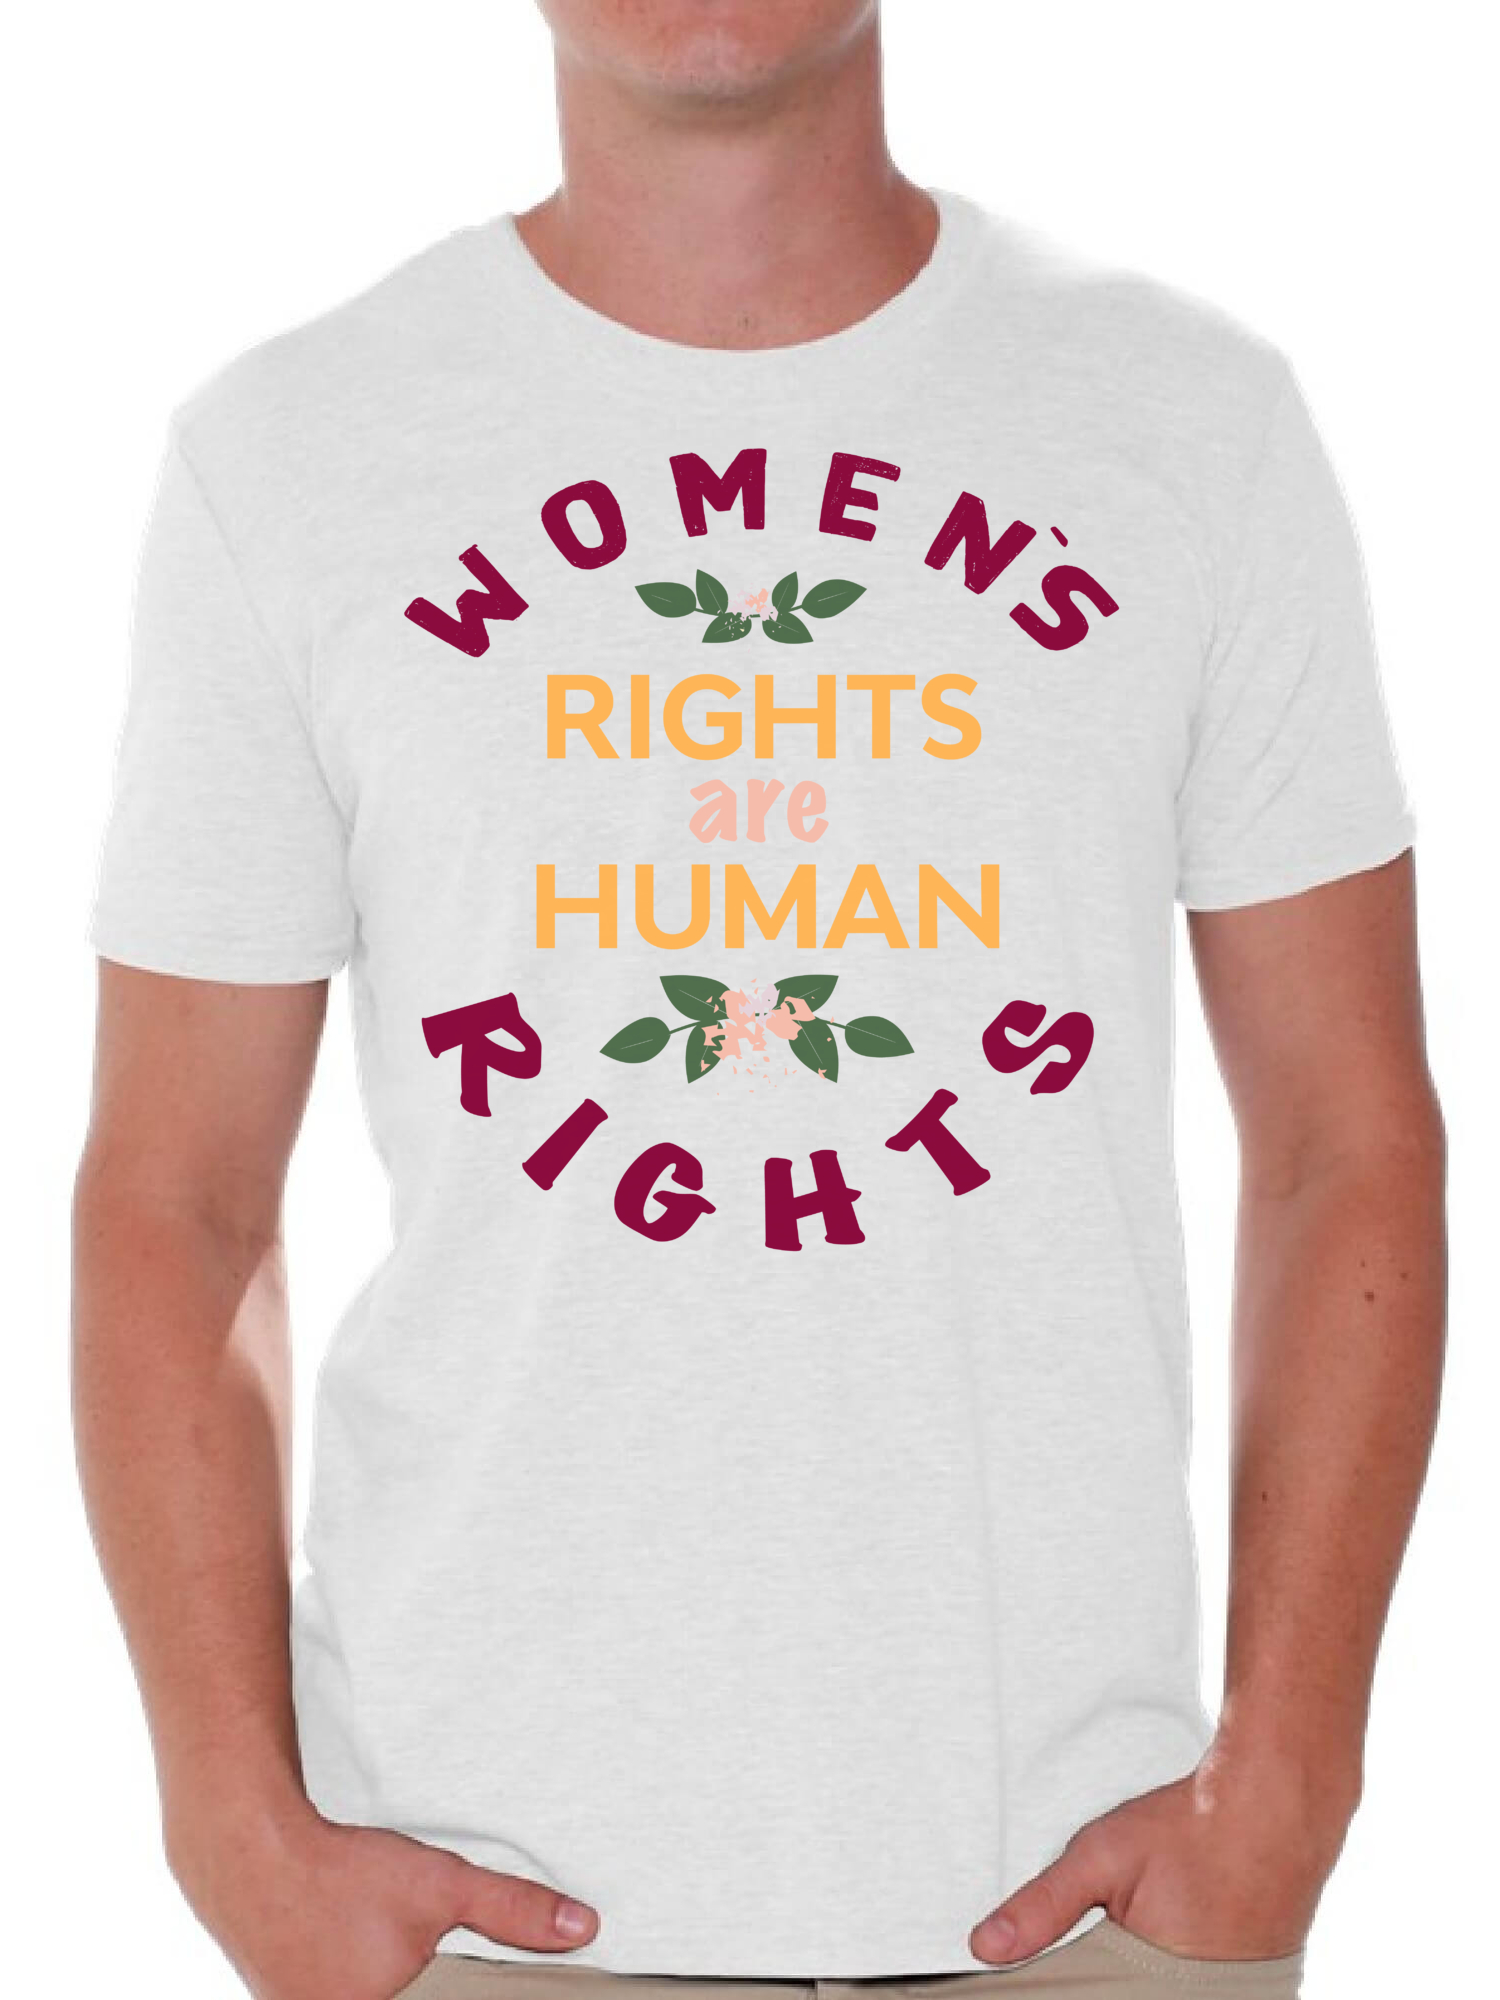 Awkward Styles Women's Rights are Human Rights T-Shirt Feminist T Shirts for Men Feminism Protest Tee Walmart.com